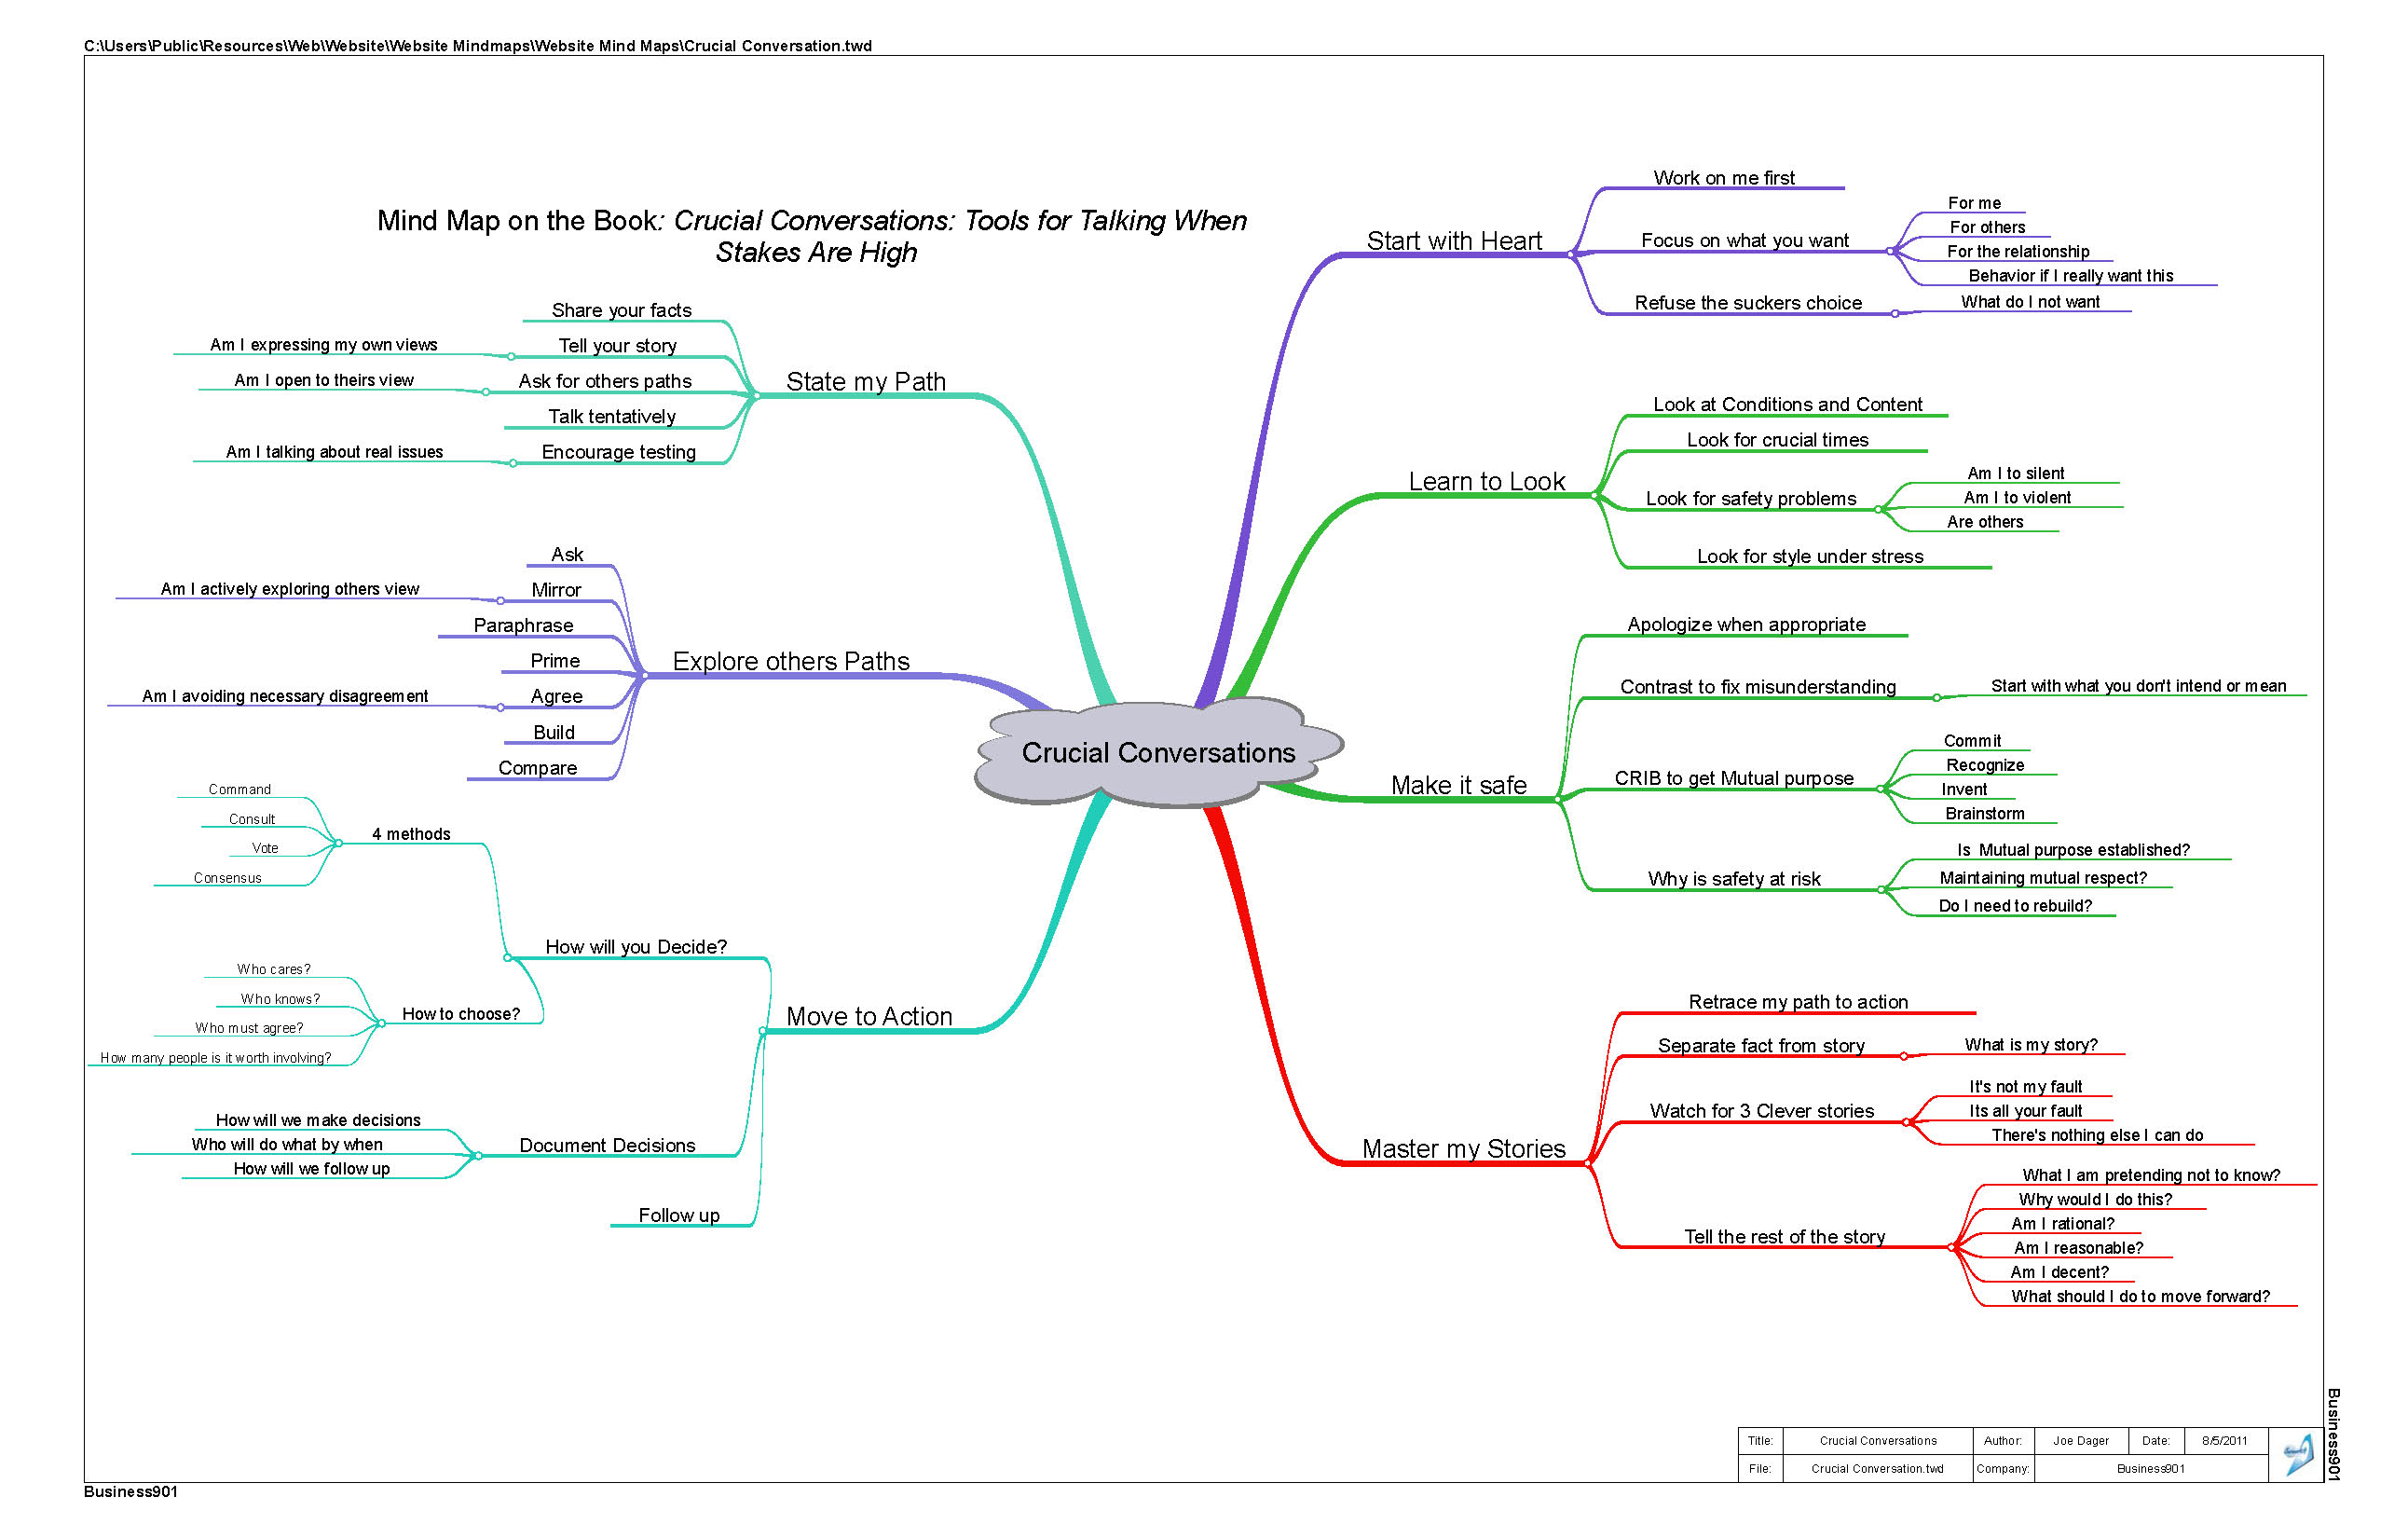 mind-map-on-crucial-conversations